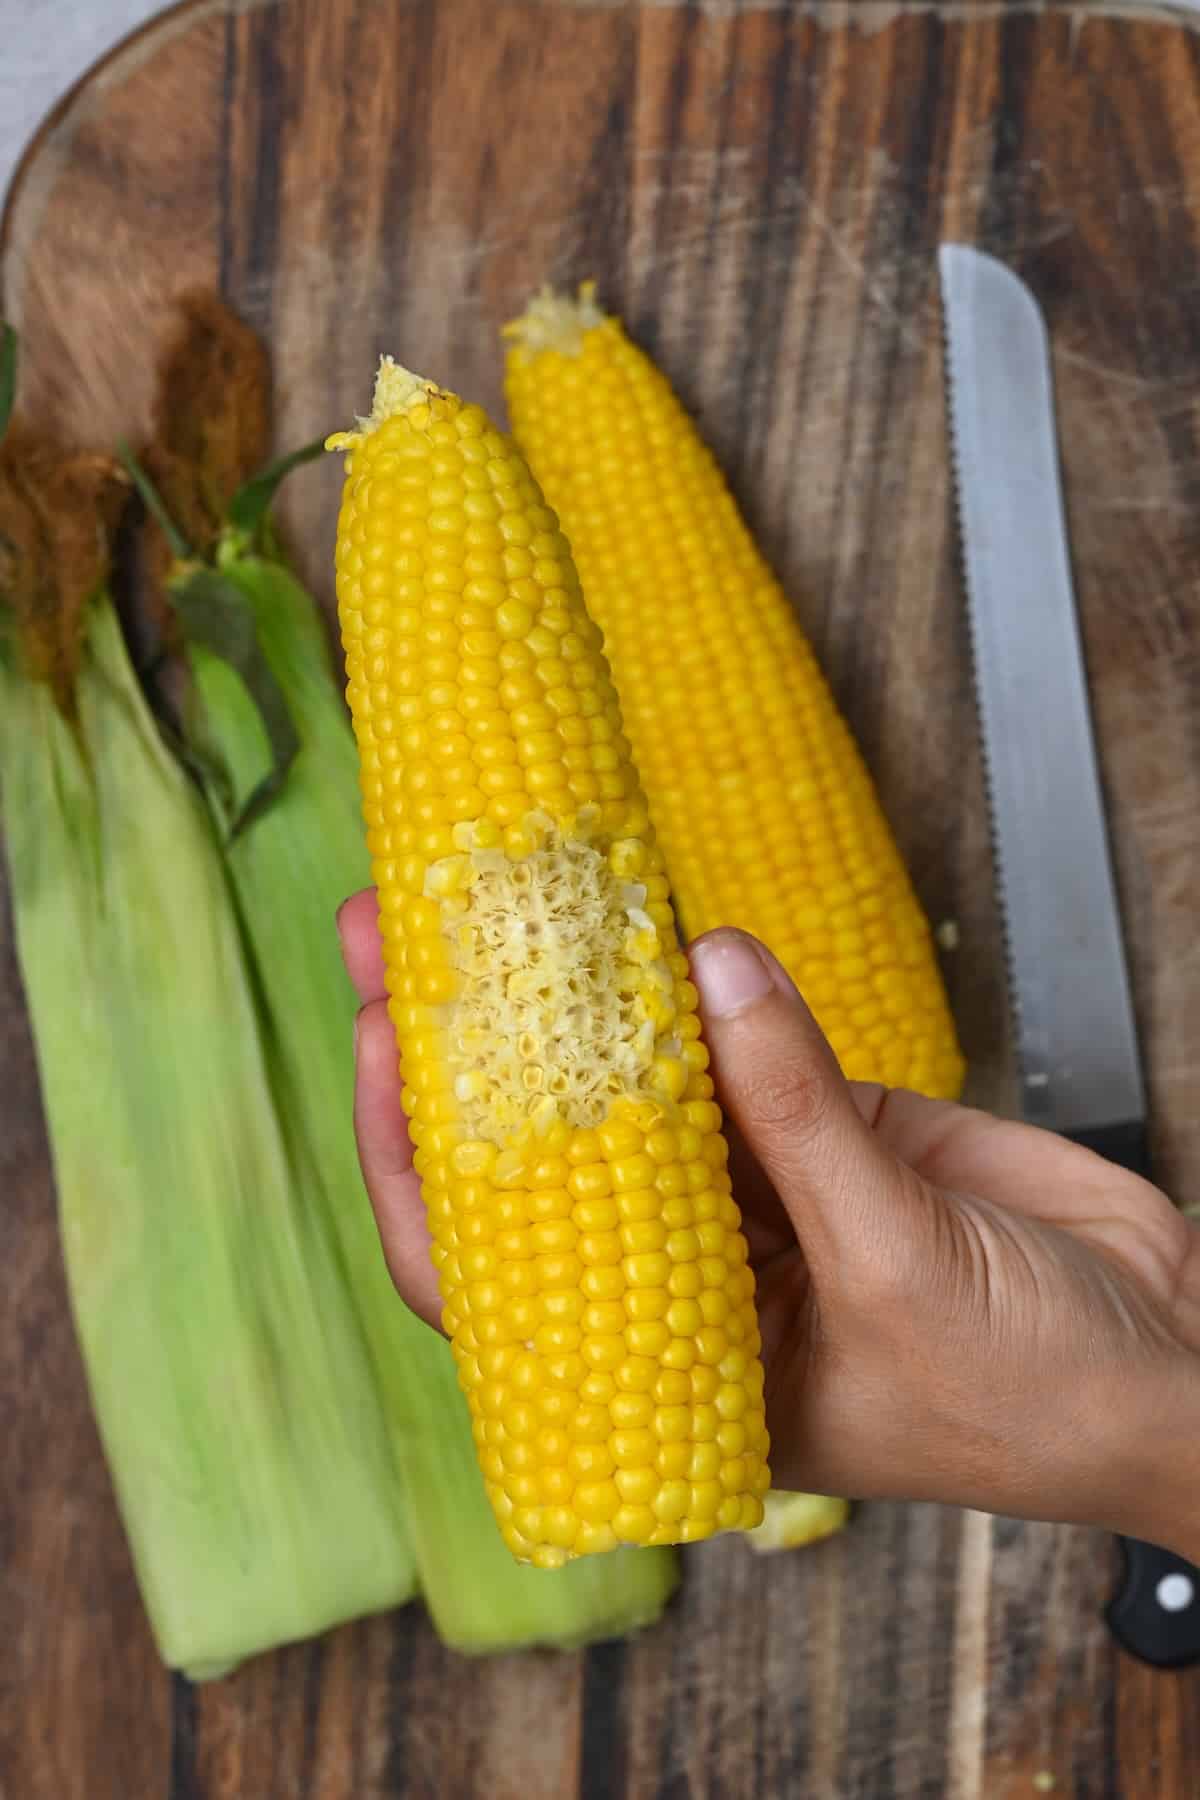 Microwaved corn on the cob that's a part eaten